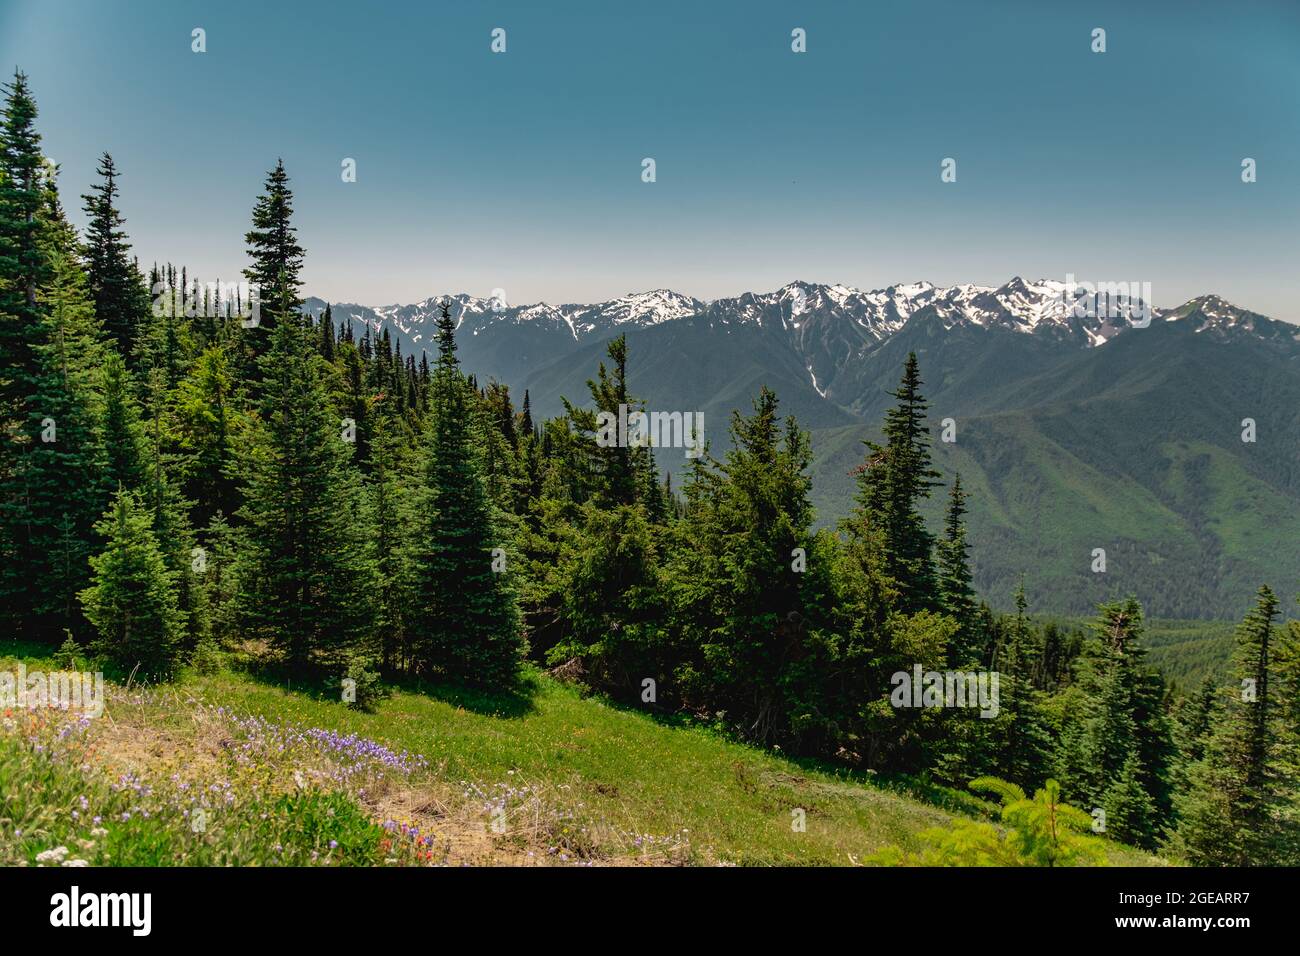 The Olympic mountains in summer, viewed from the Hurricane Hill trail in Olympic National Park. Stock Photo